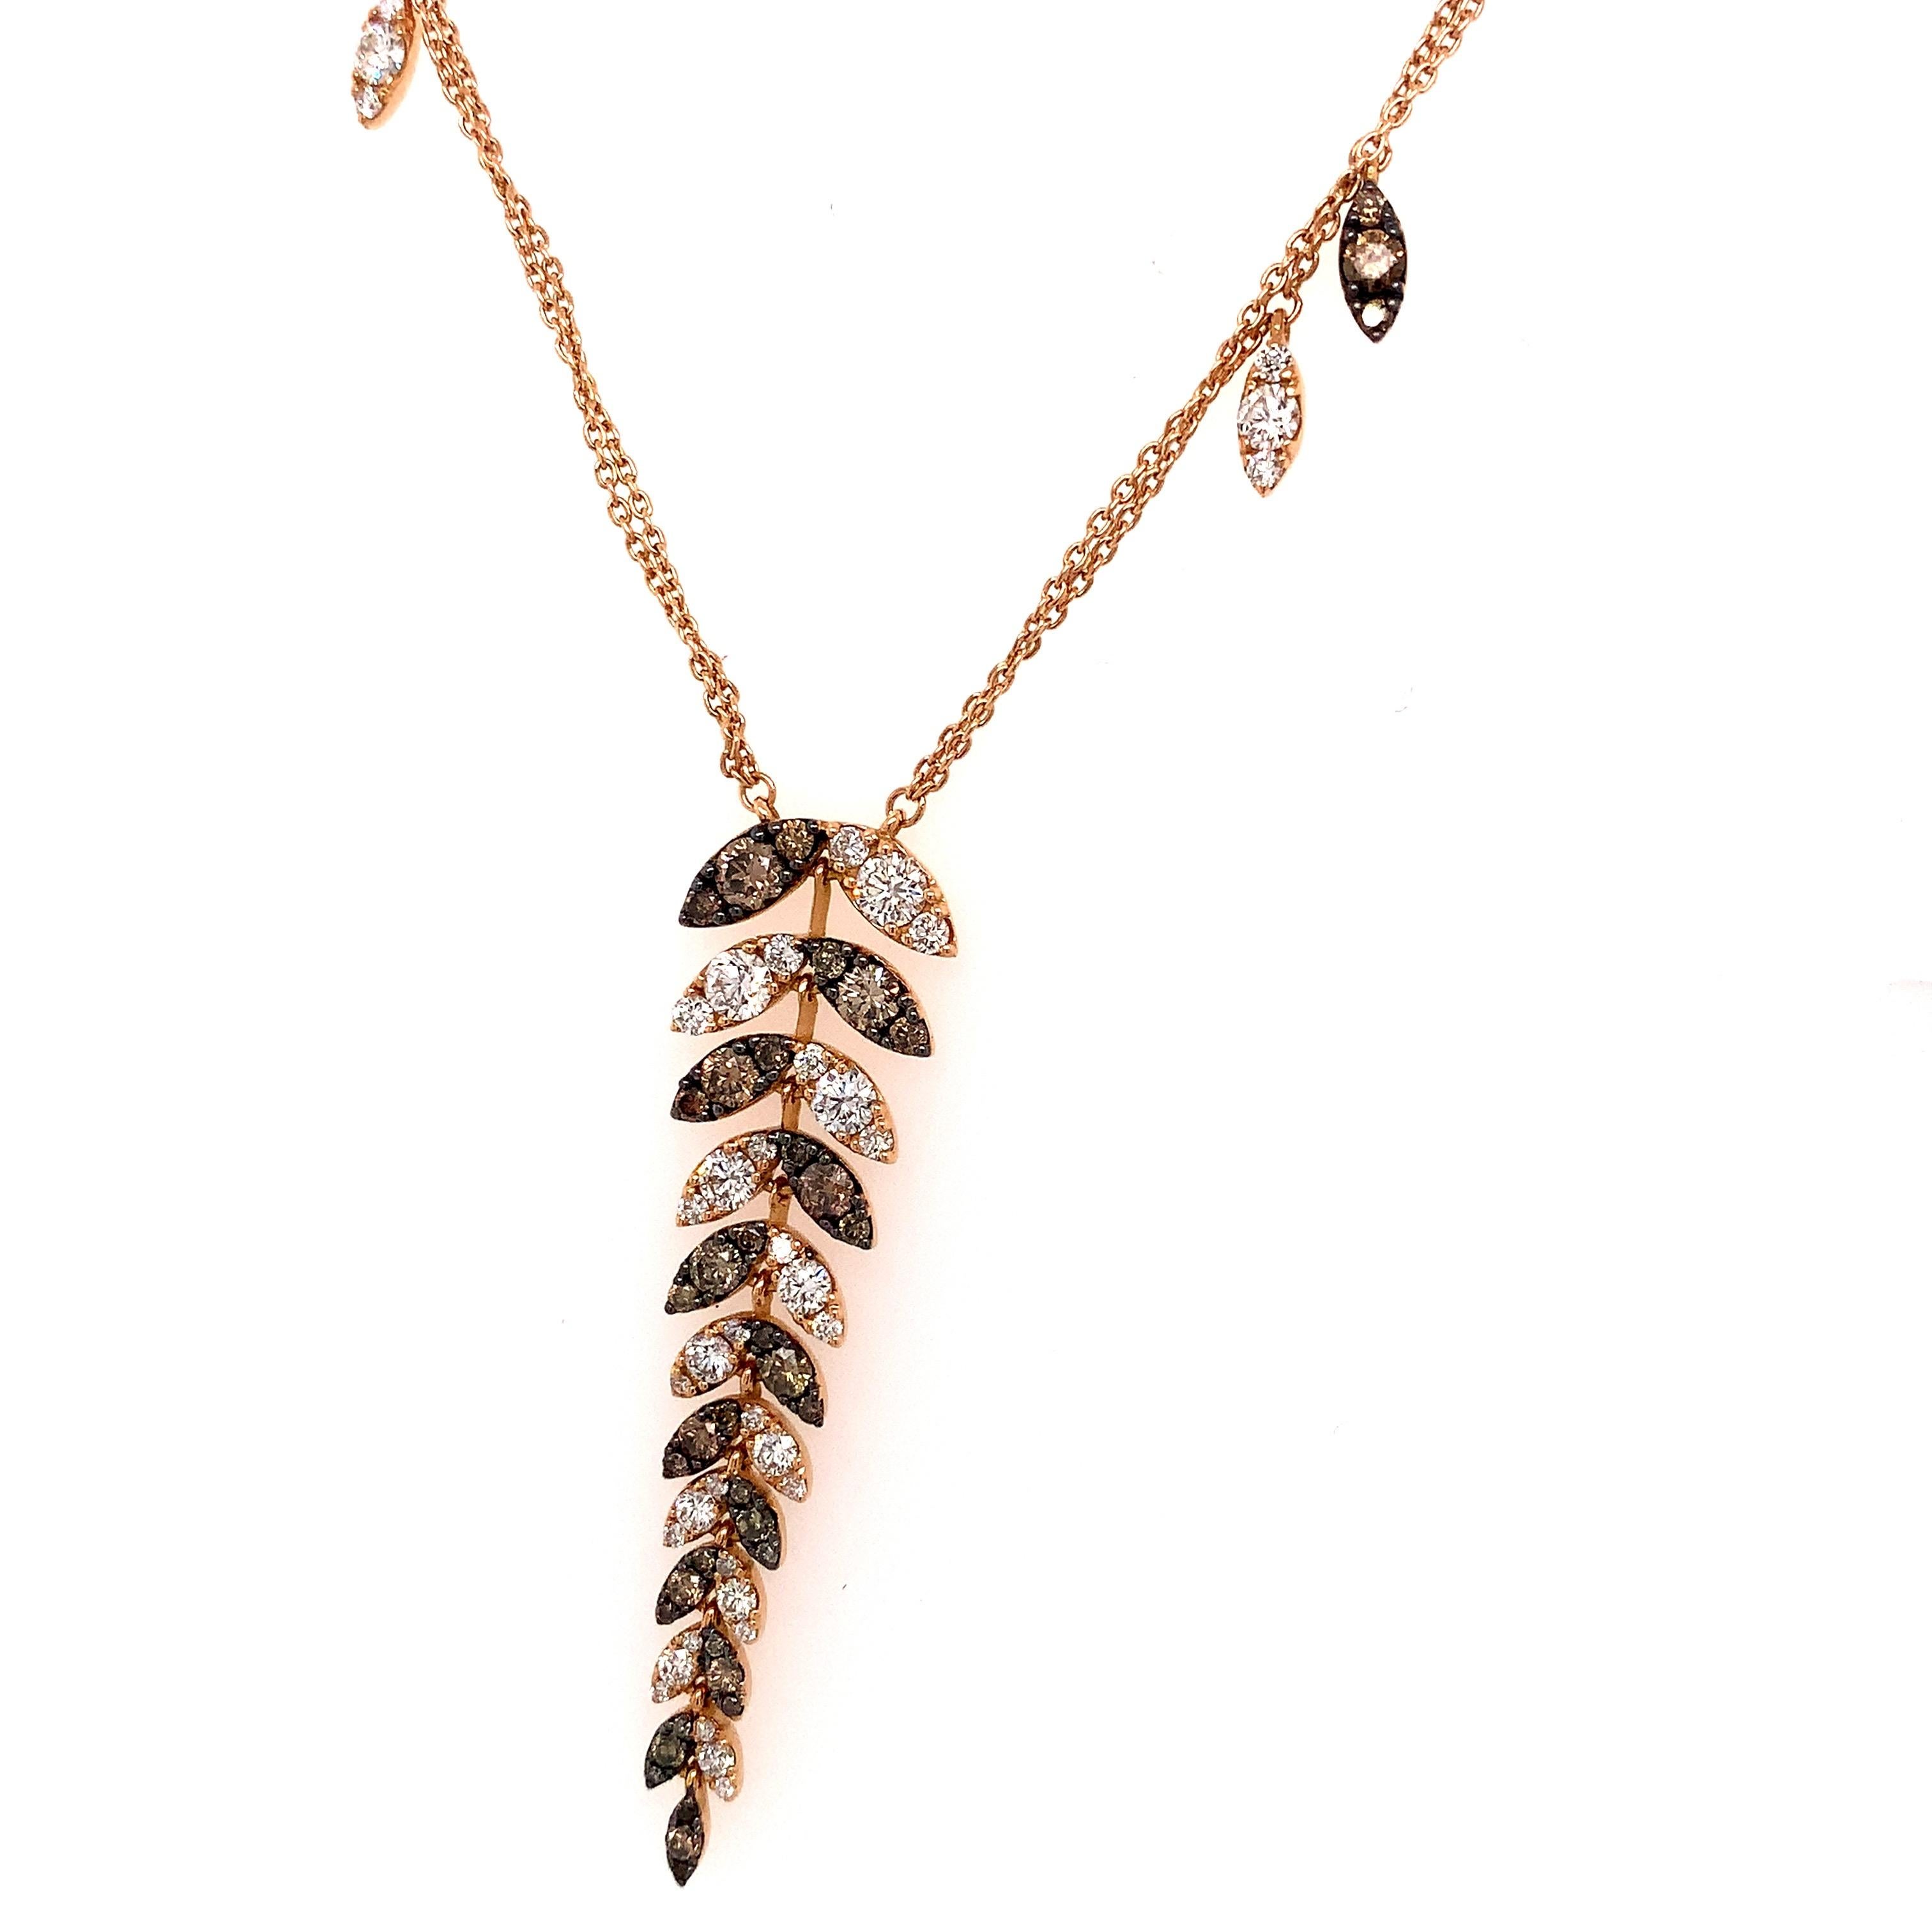 Contemporary OWN Your Story 18 Karat Gold Cognac and White Diamond Delicate Fern Double Chain For Sale